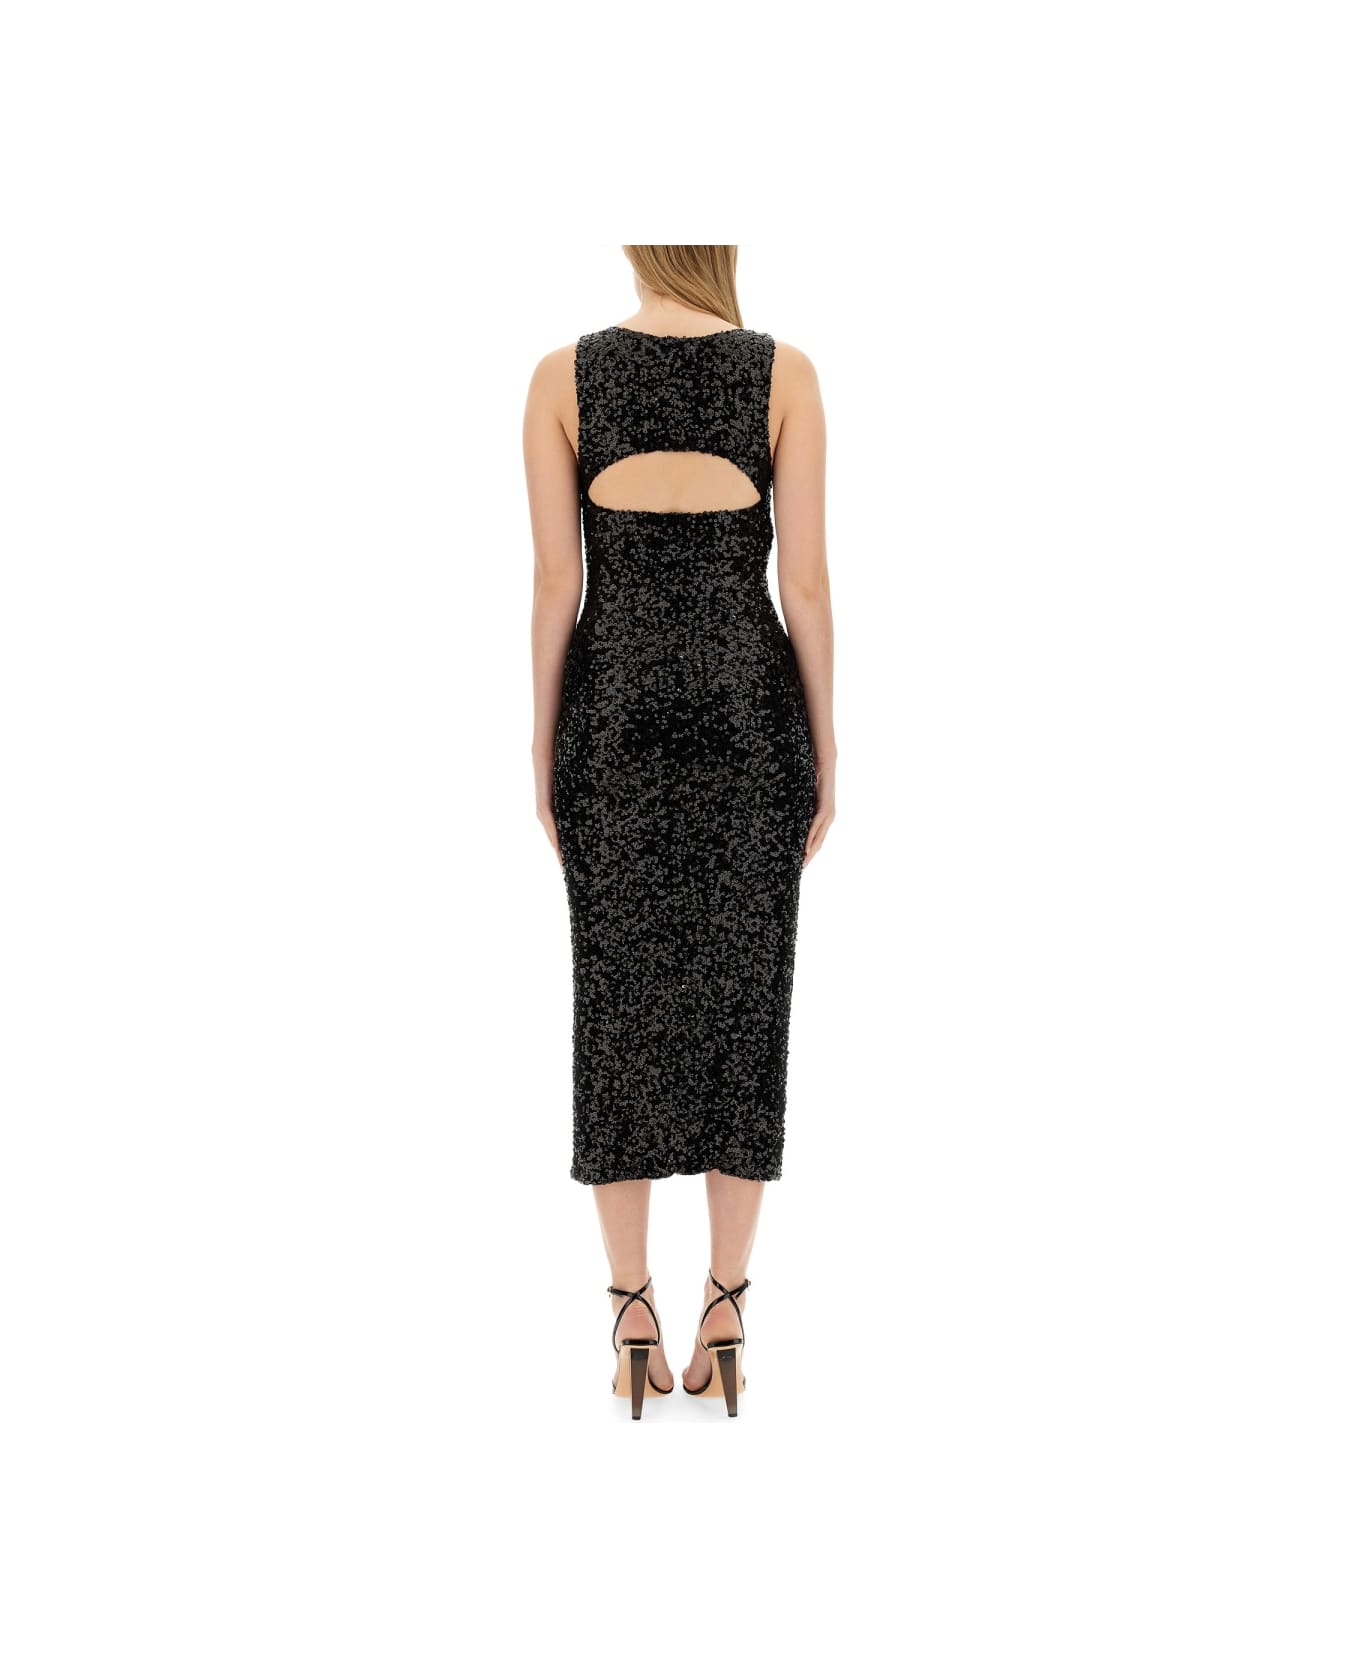 M05CH1N0 Jeans Sequined Dress - BLACK